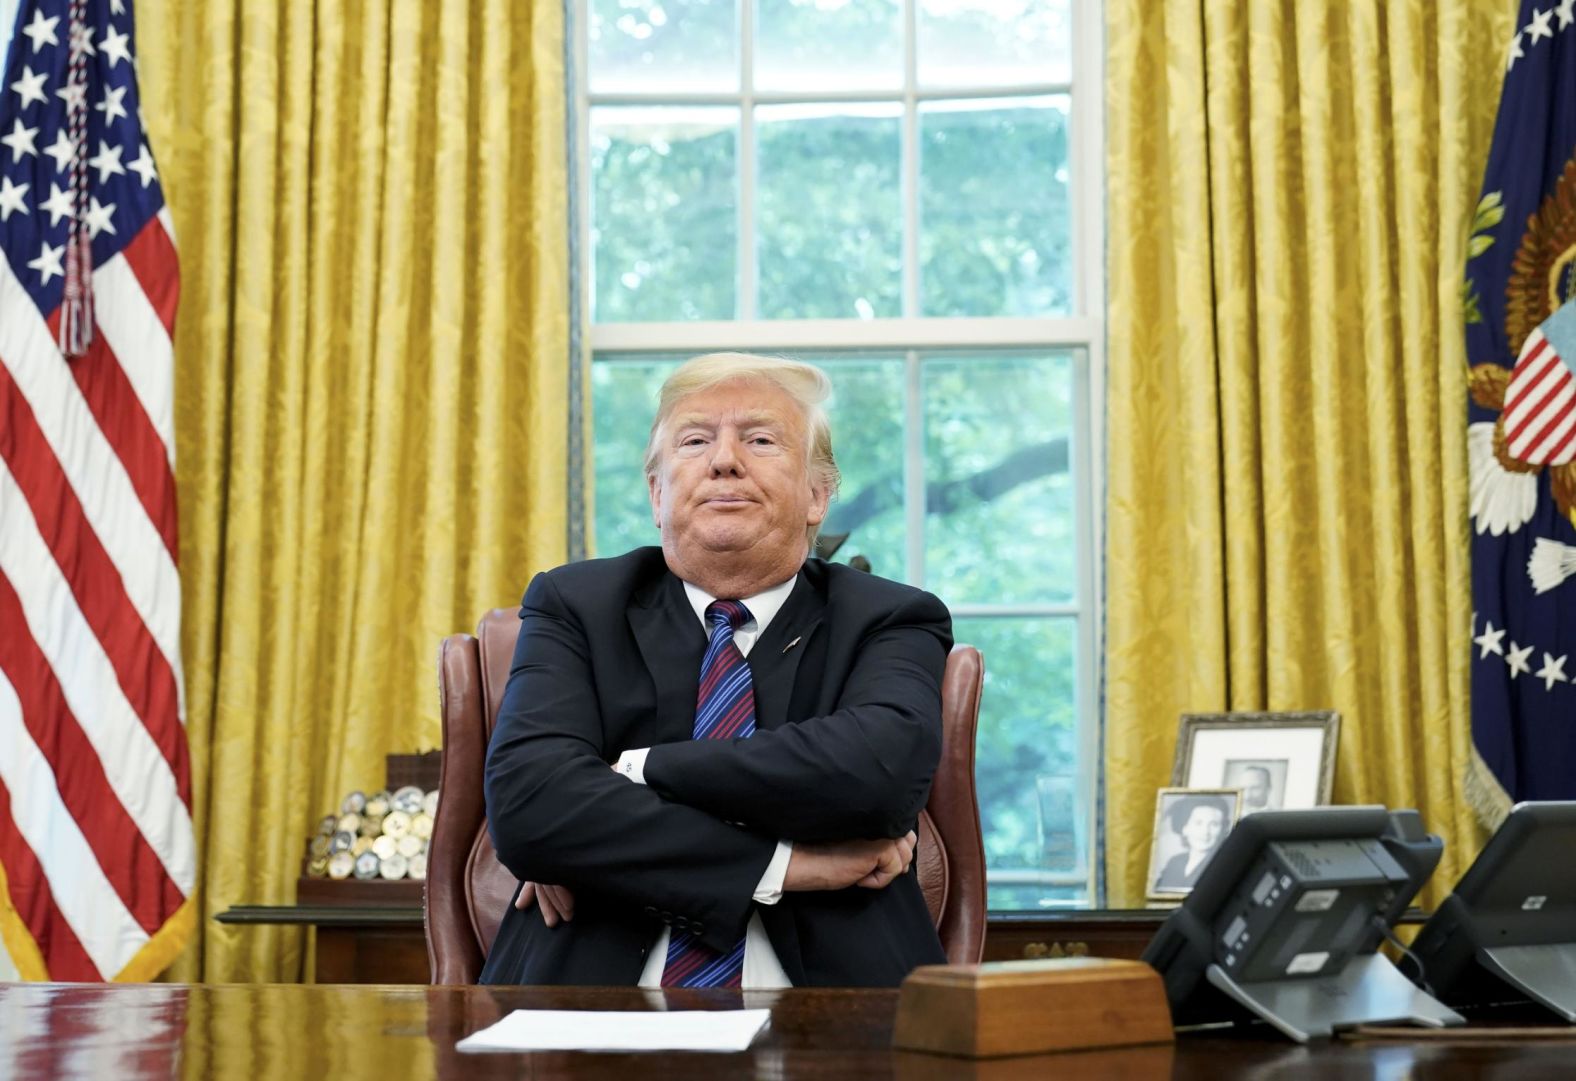 Trump speaks to reporters in the Oval Office after a phone conversation with Mexico's President Enrique Pena Nieto on August 27. The President said the United States had reached a "really good deal" with Mexico and talks with Canada would begin shortly on <a href="https://www.cnn.com/2018/08/27/politics/trump-nafta-deal/index.html" target="_blank">a new regional free trade pact.</a> "It's a big day for trade. It's a really good deal for both countries," Trump said.